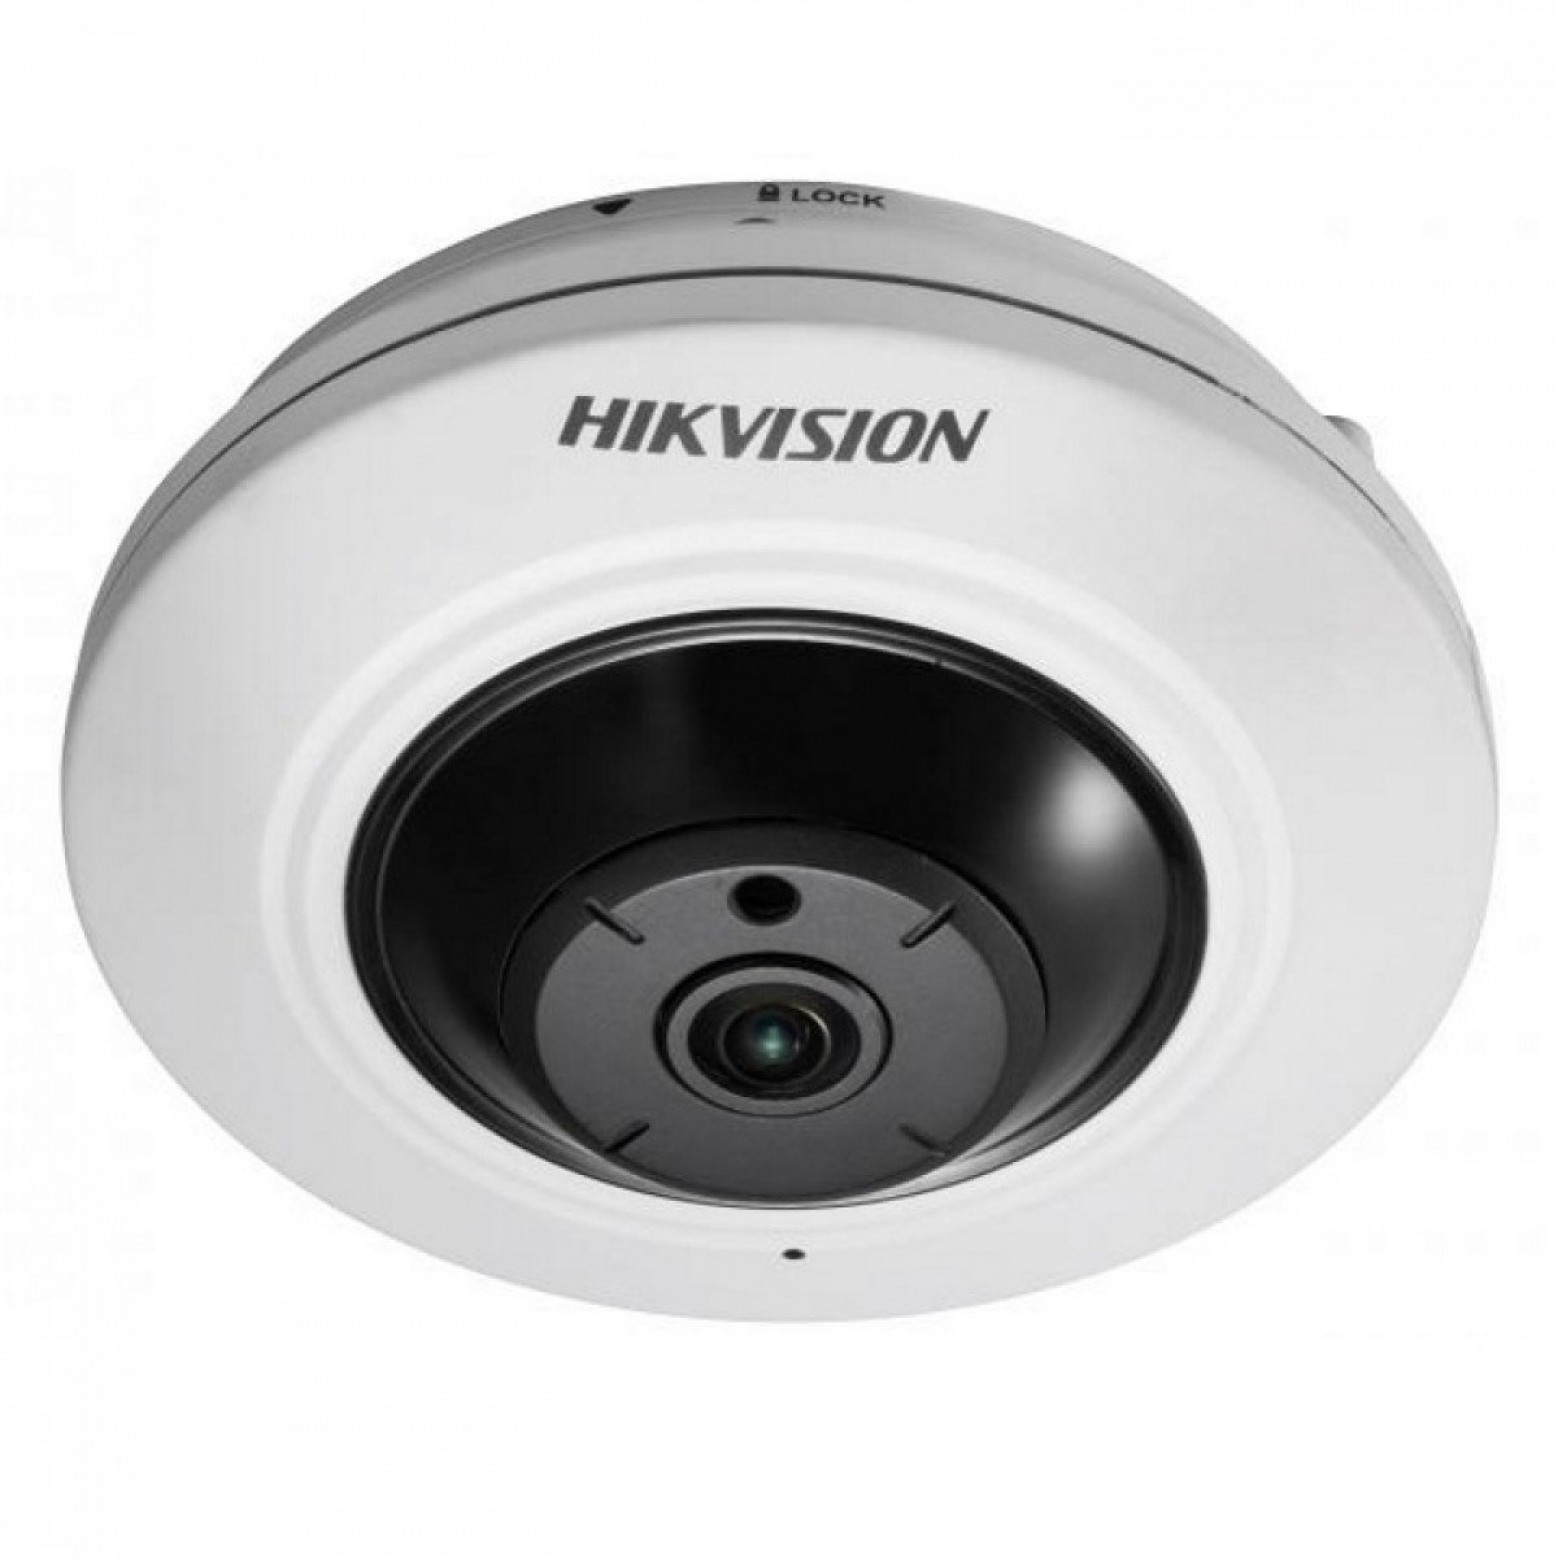 Hikvision DS-2CD2935FWD-I Gouden Label, Fish Eye, 3MP, IR